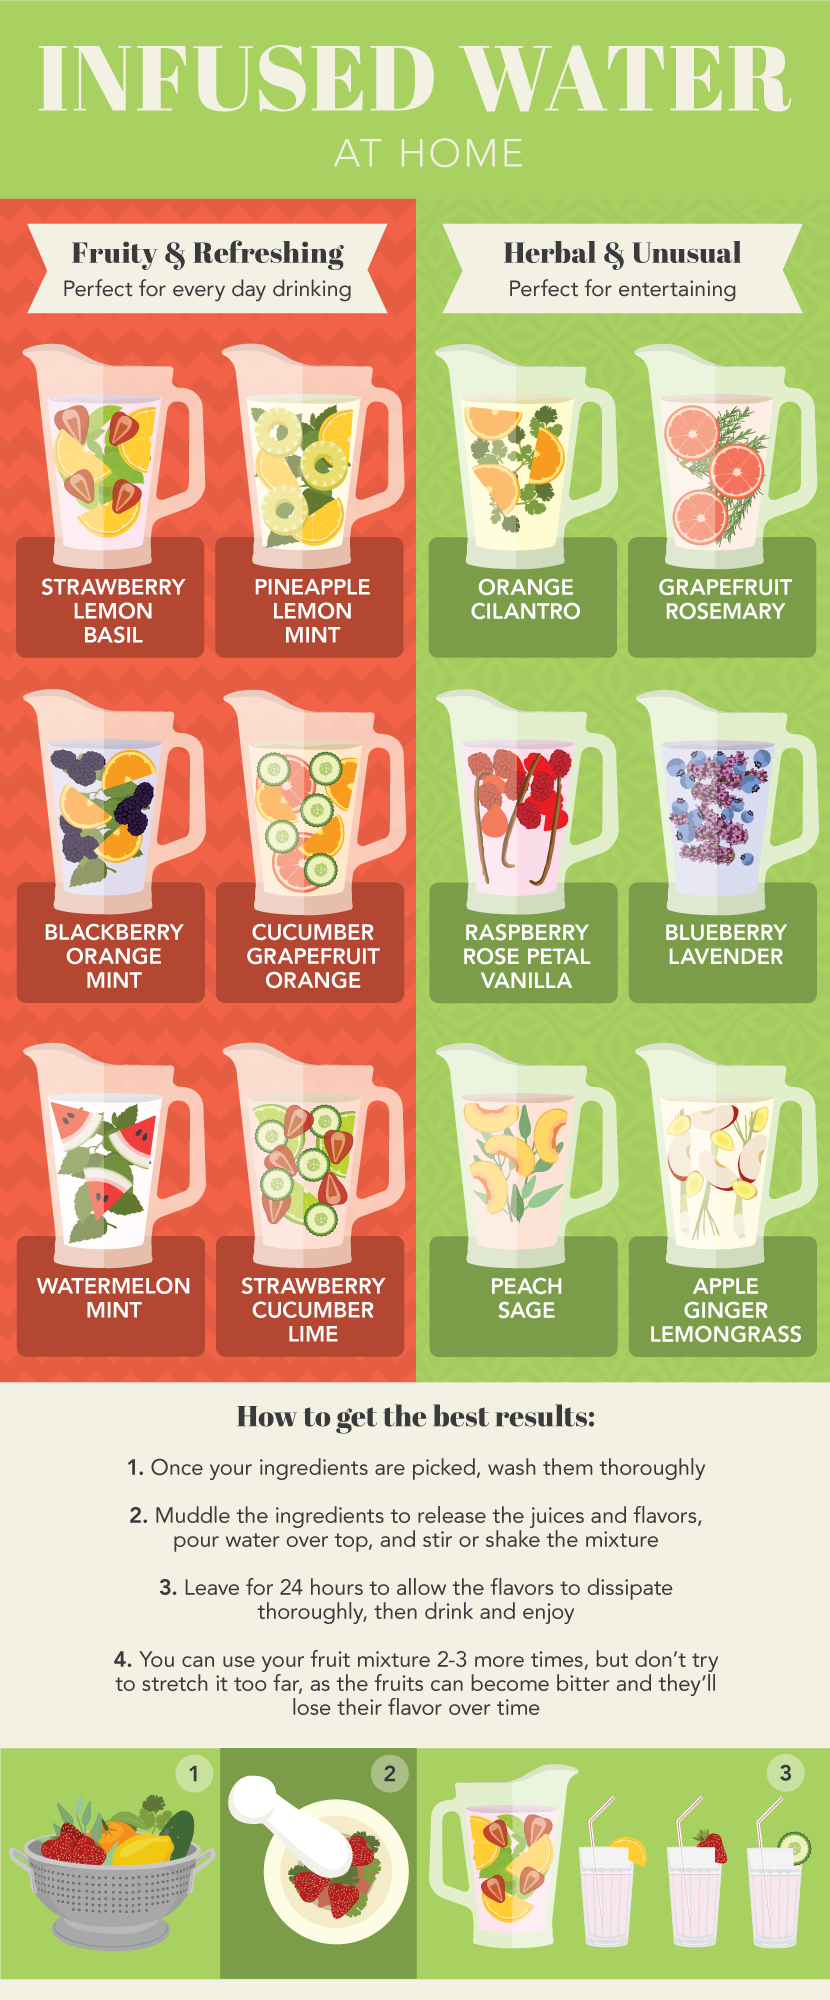 Infusing Water At Home: Healthy Recipes To Try Infographic